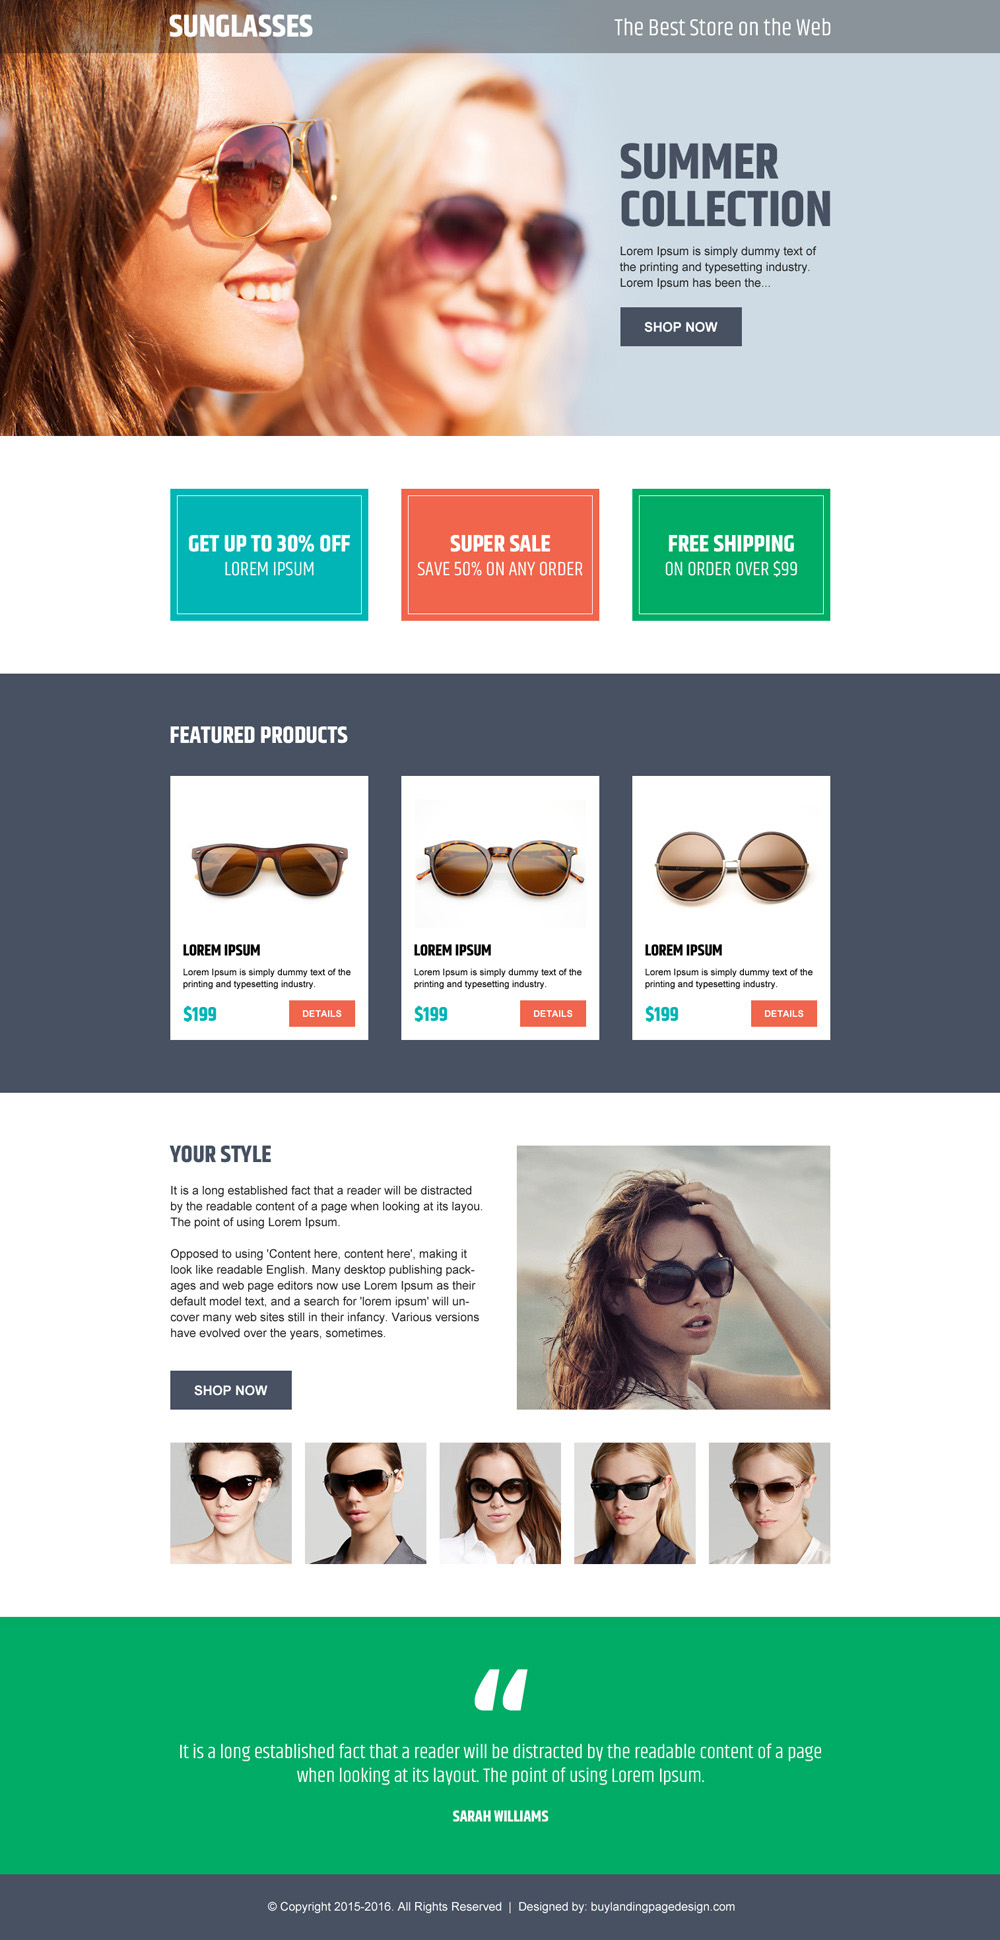 online-store-for-sunglasses-call-to-action-landing-page-design-001